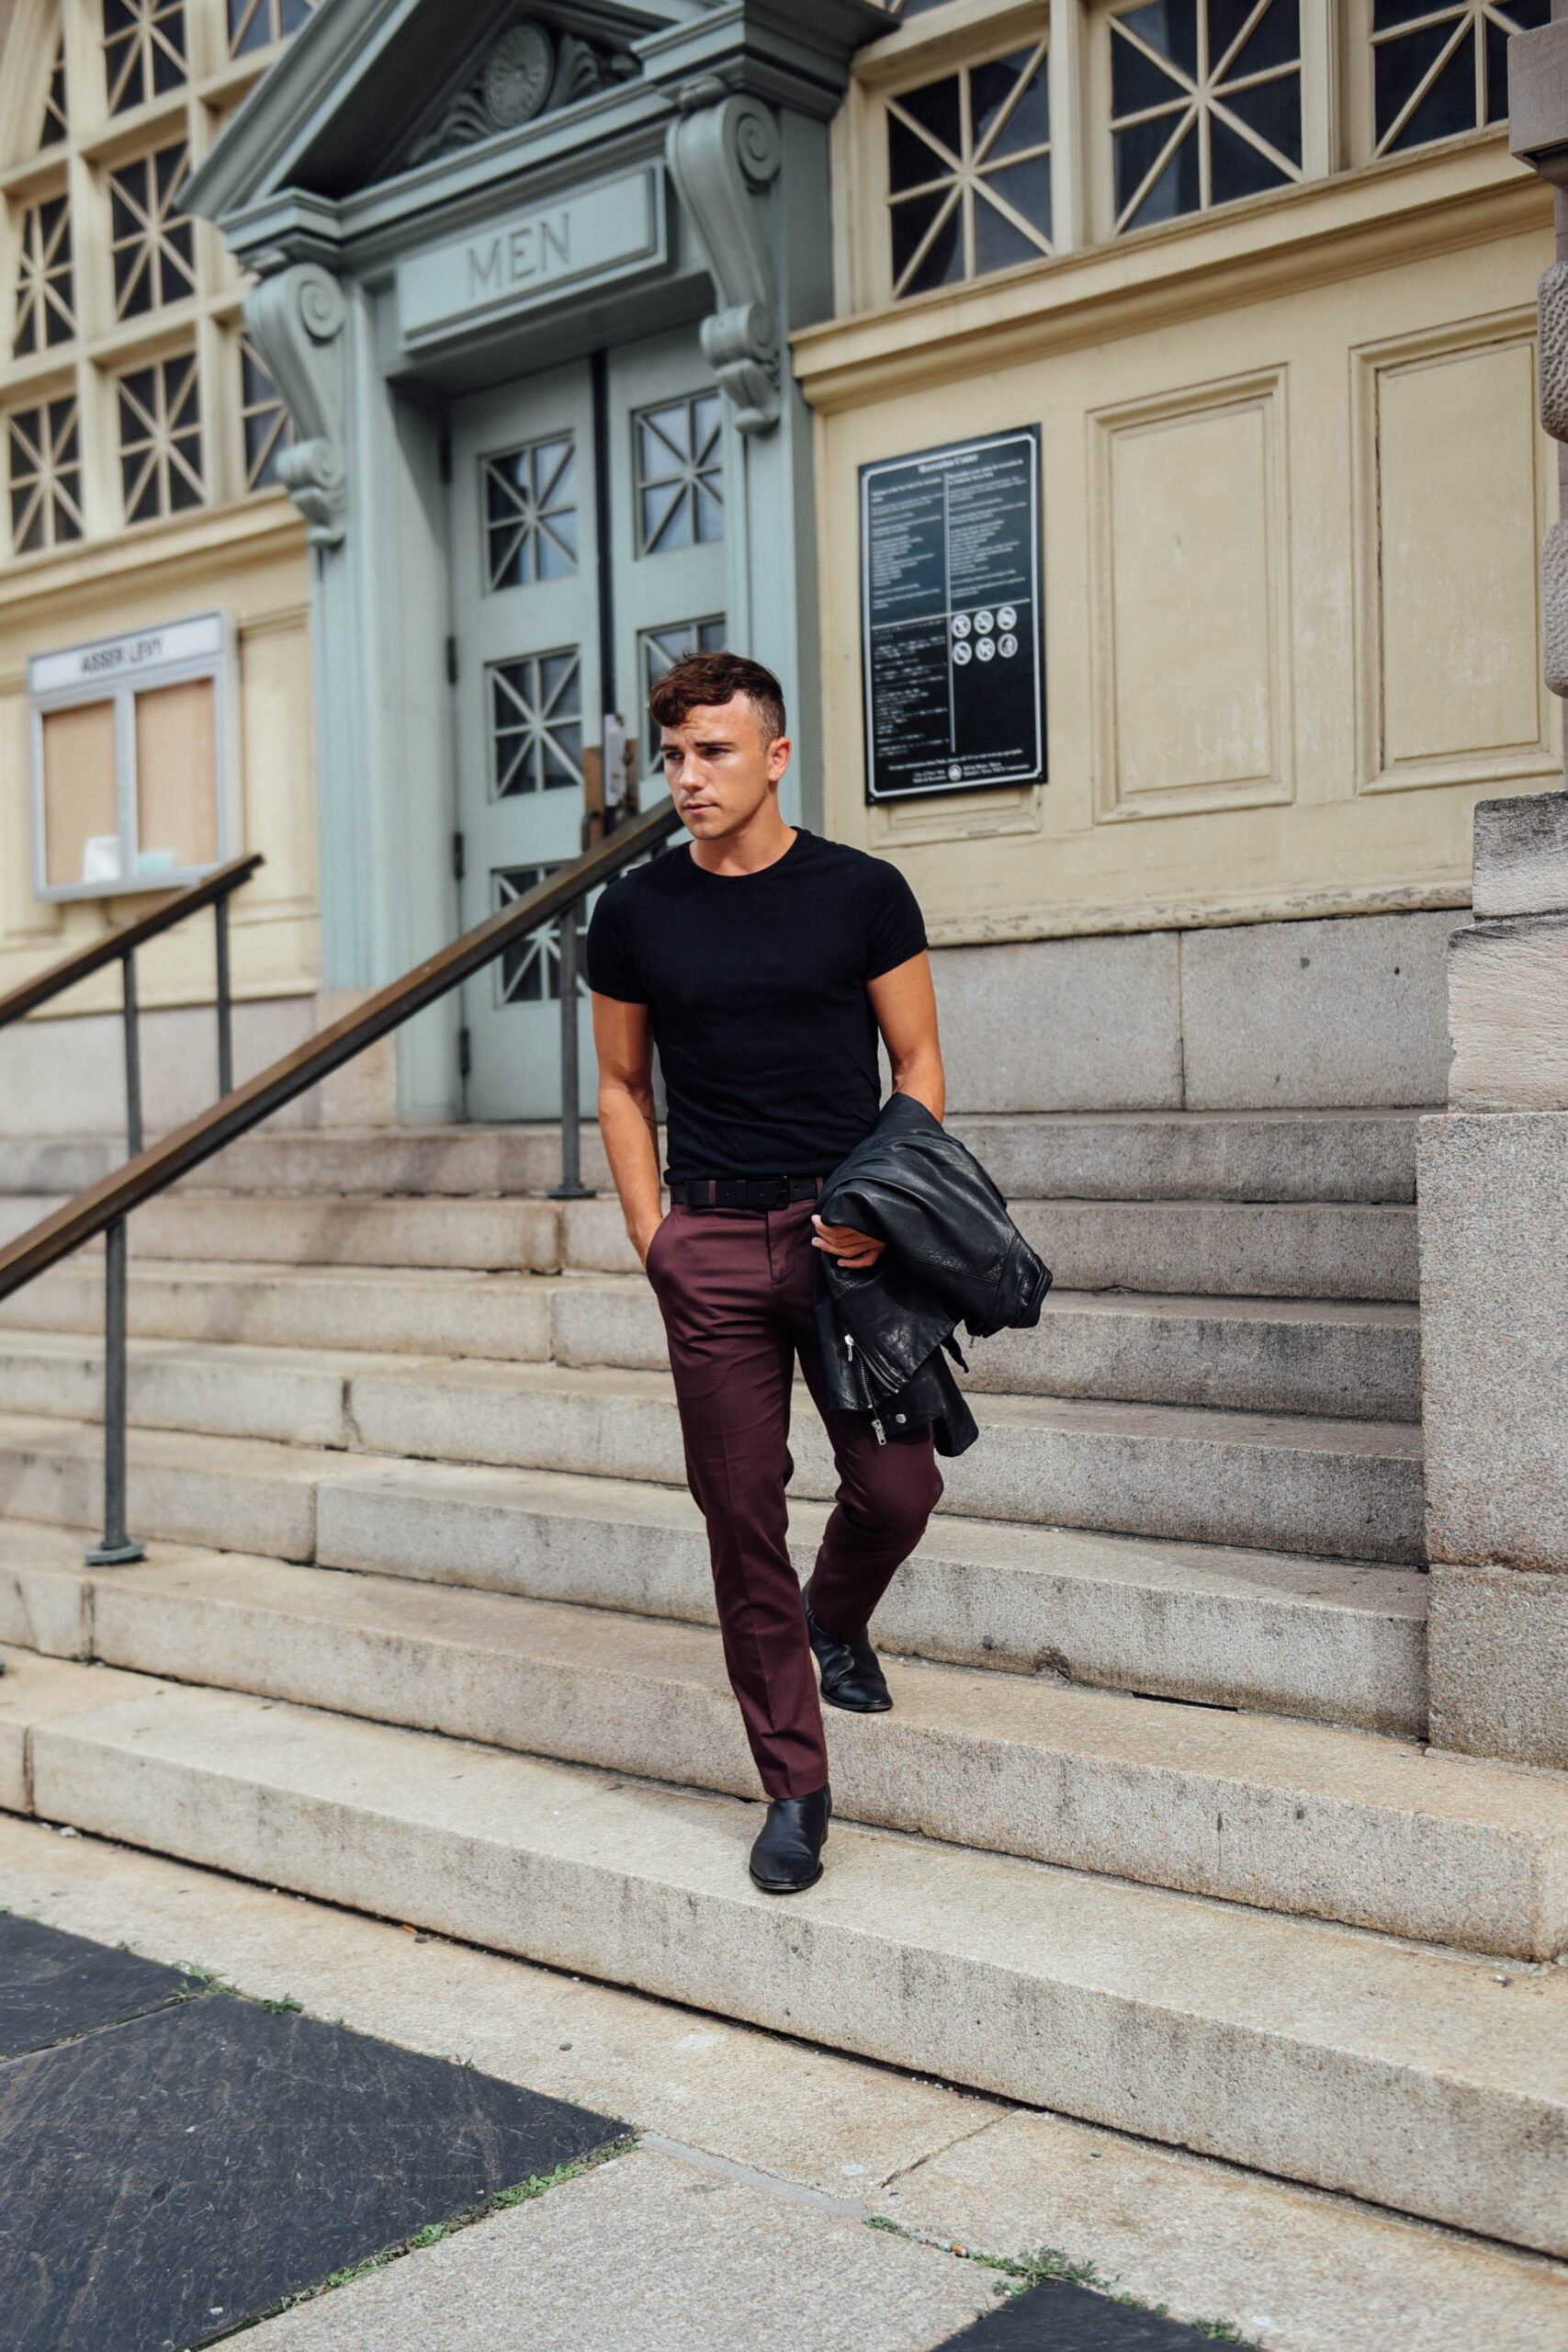 Men's Fashion Travel and Lifestyle Blogger Justin Livingston wears Express Men's Slim Suit and Leather Moto Jacket in New York City